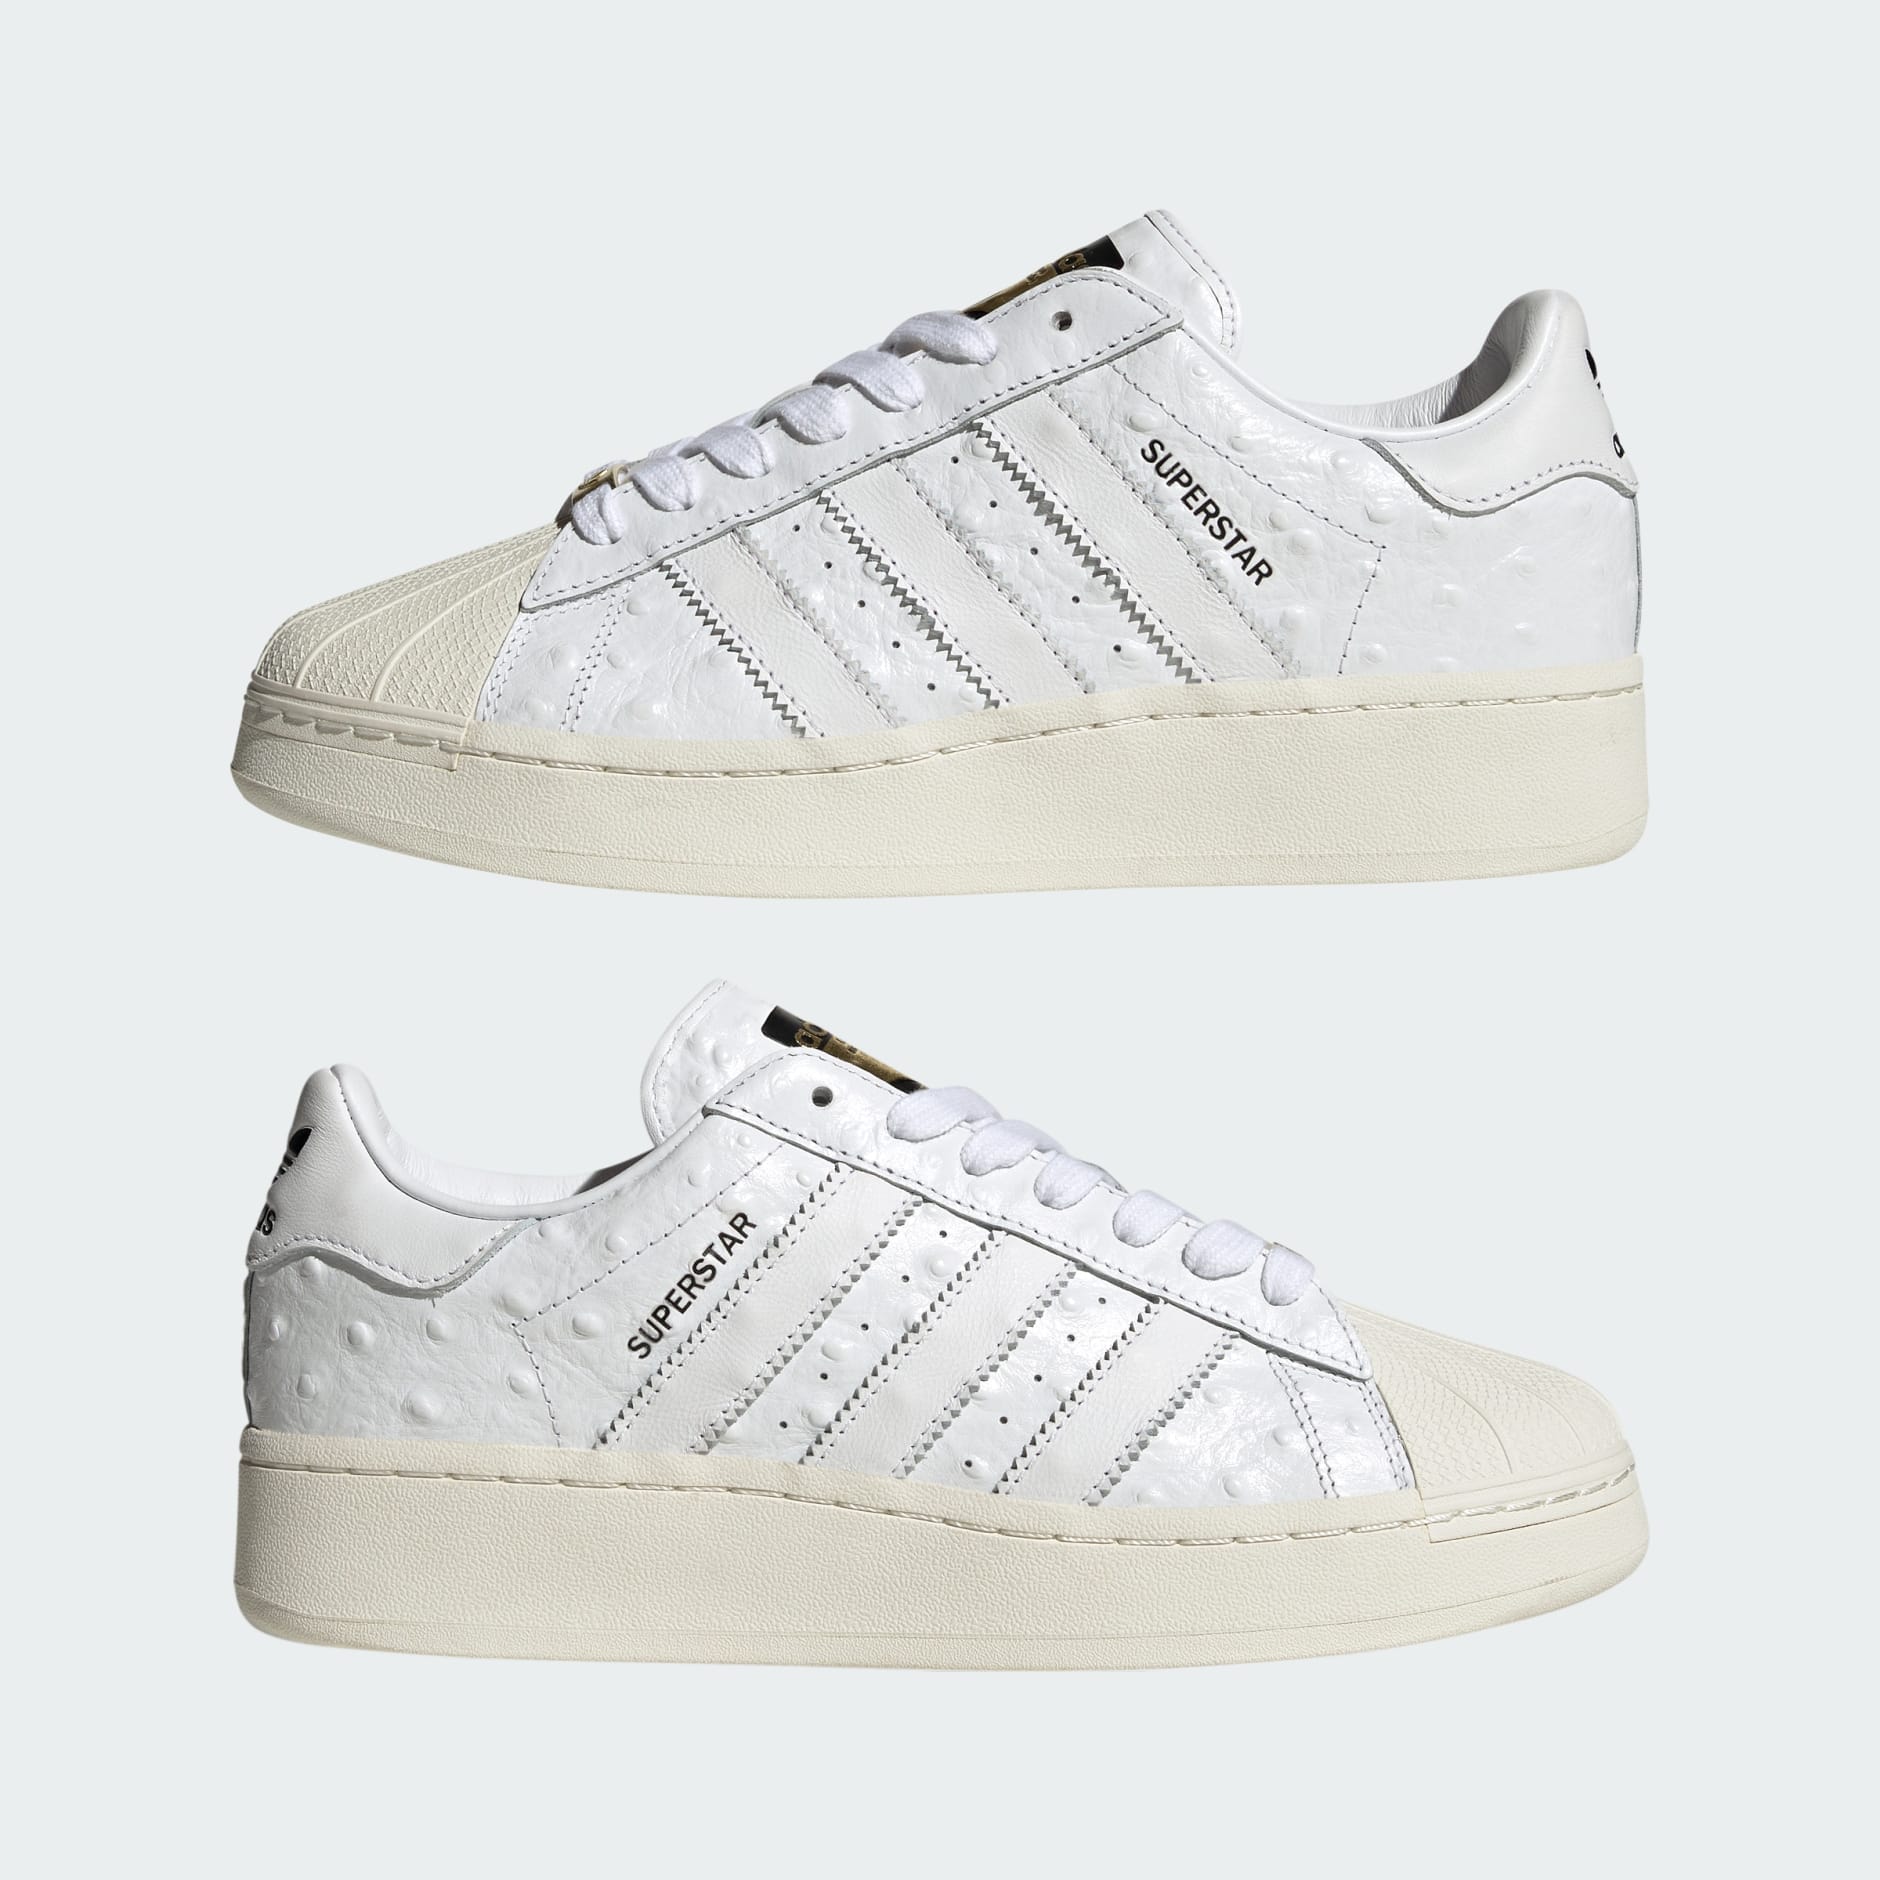 Shoes - Superstar XLG Shoes - White | adidas Qatar